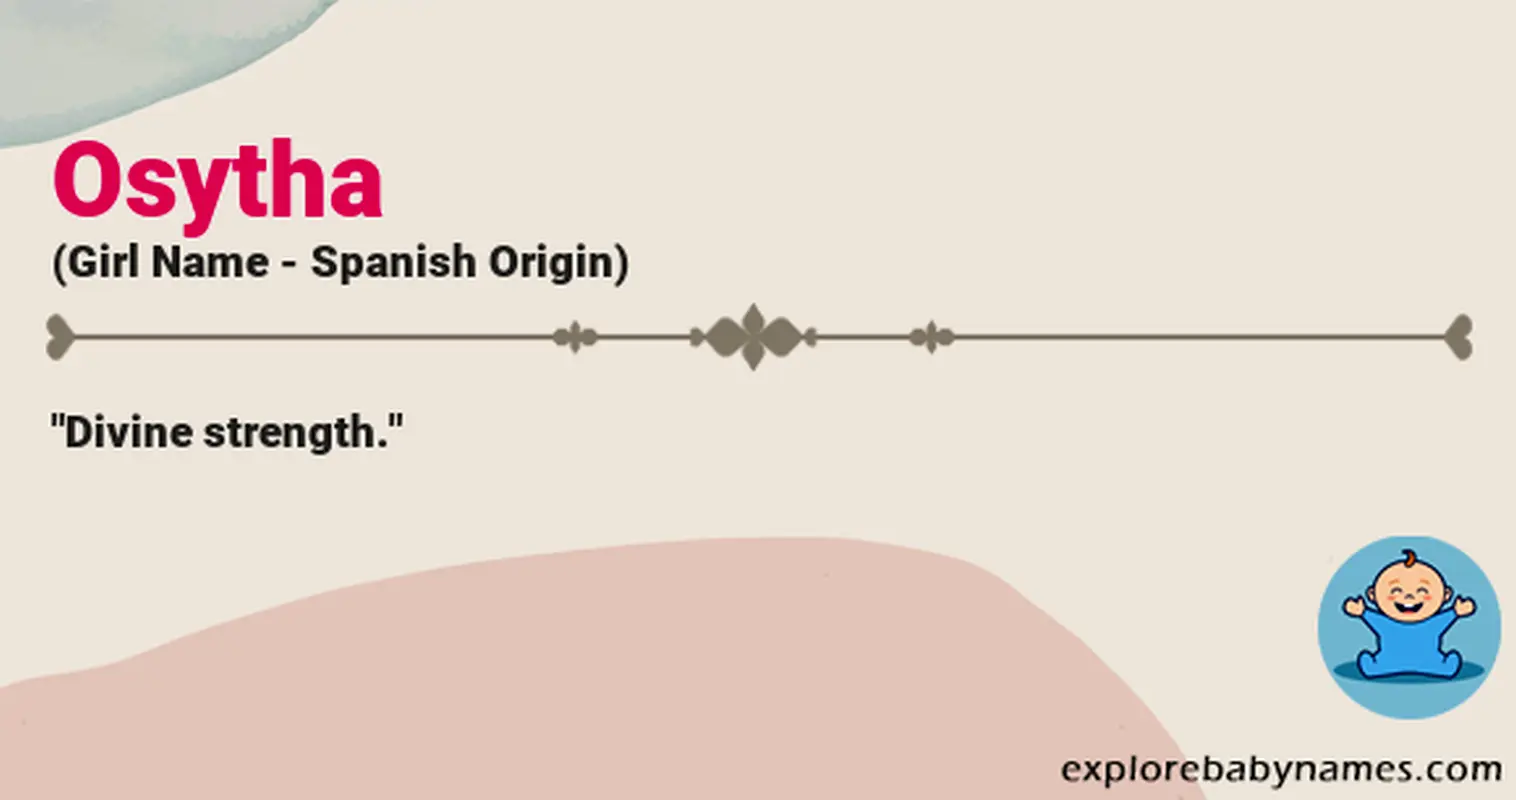 Meaning of Osytha